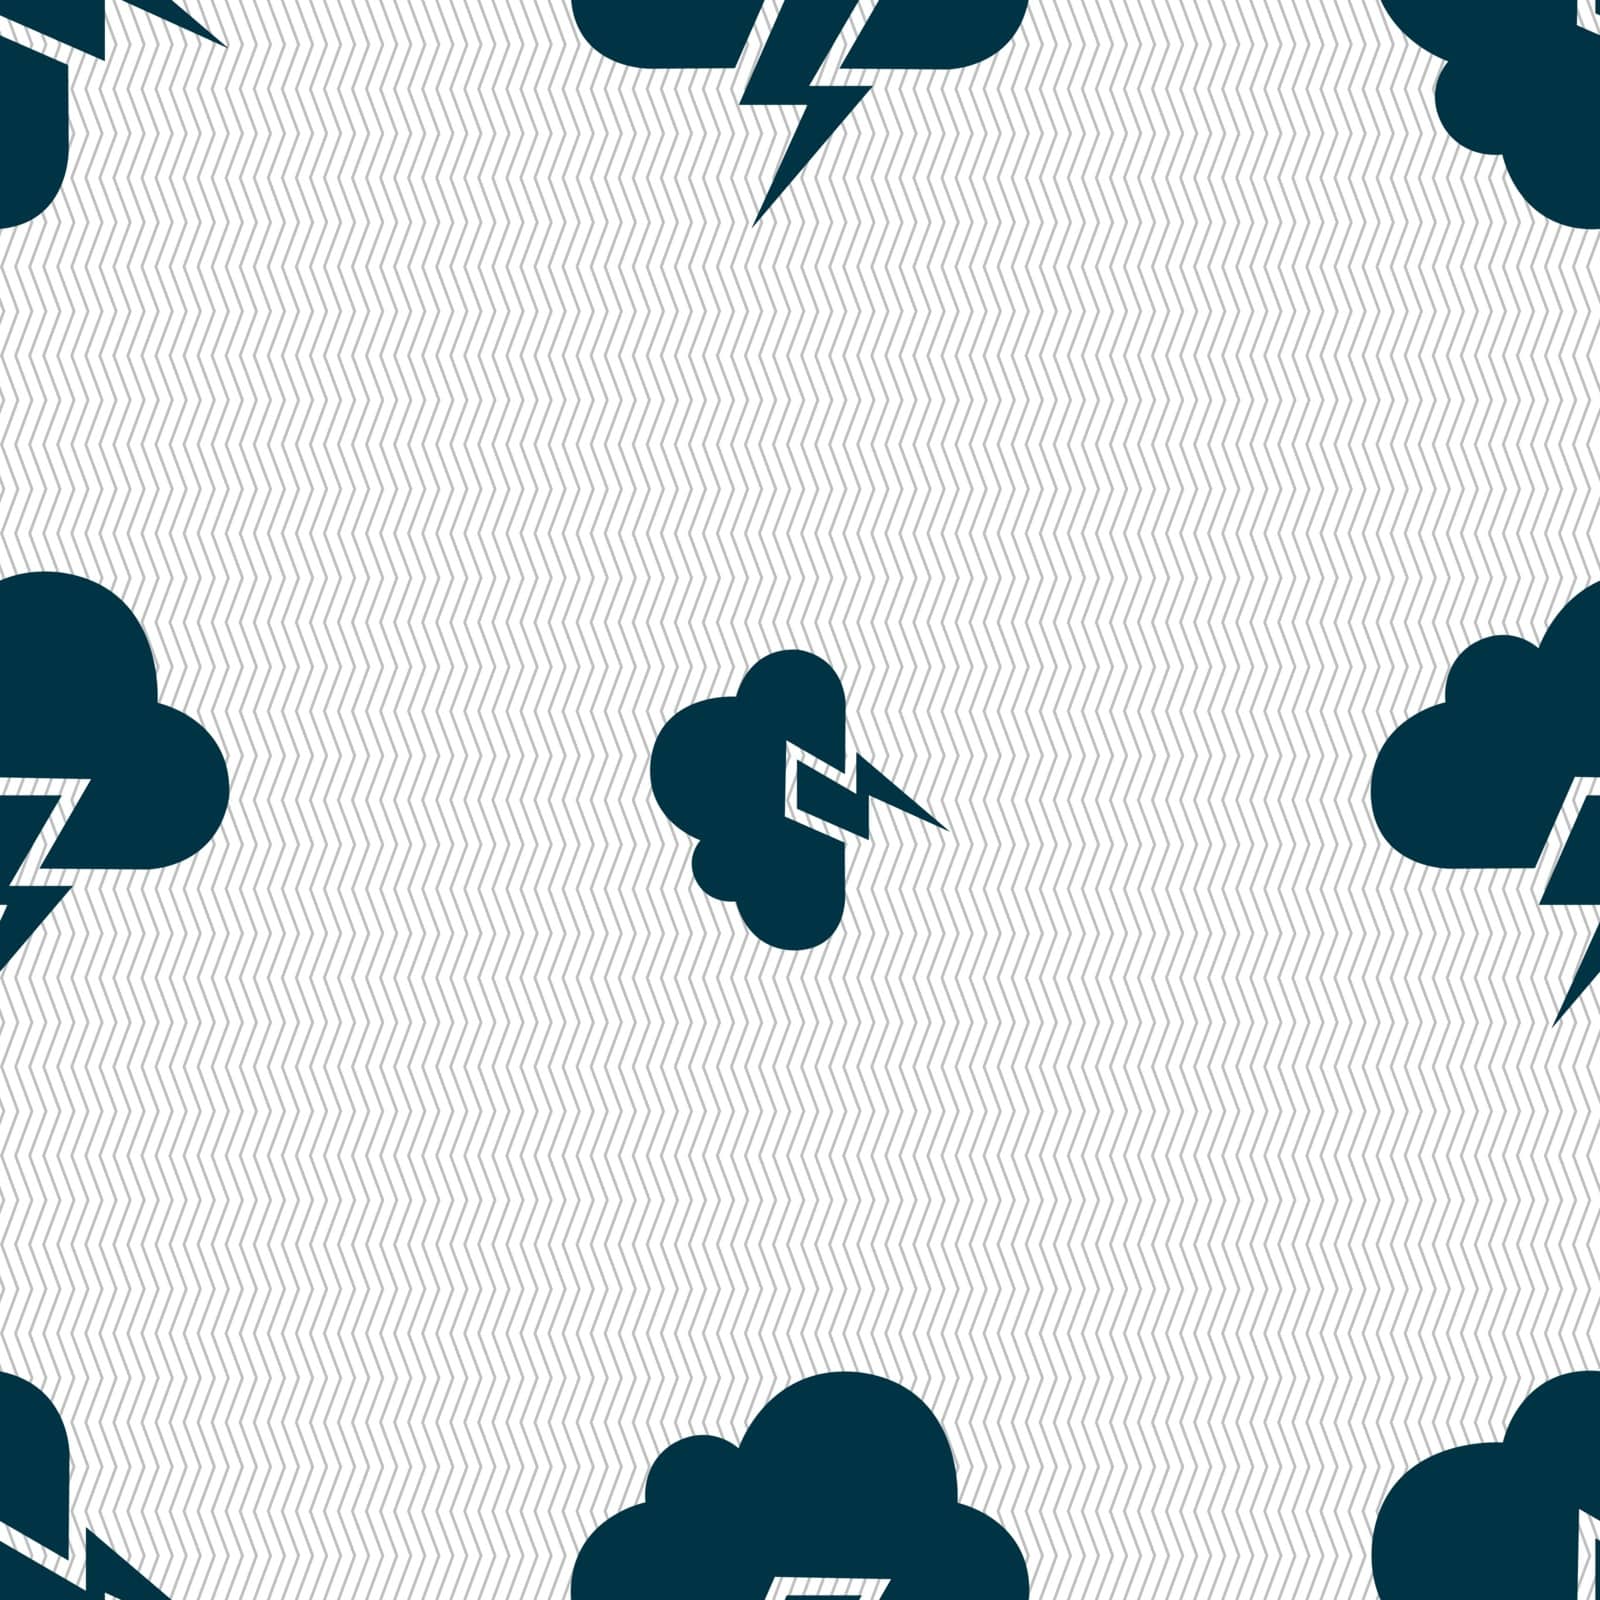 Heavy thunderstorm icon sign. Seamless pattern with geometric texture. Vector illustration